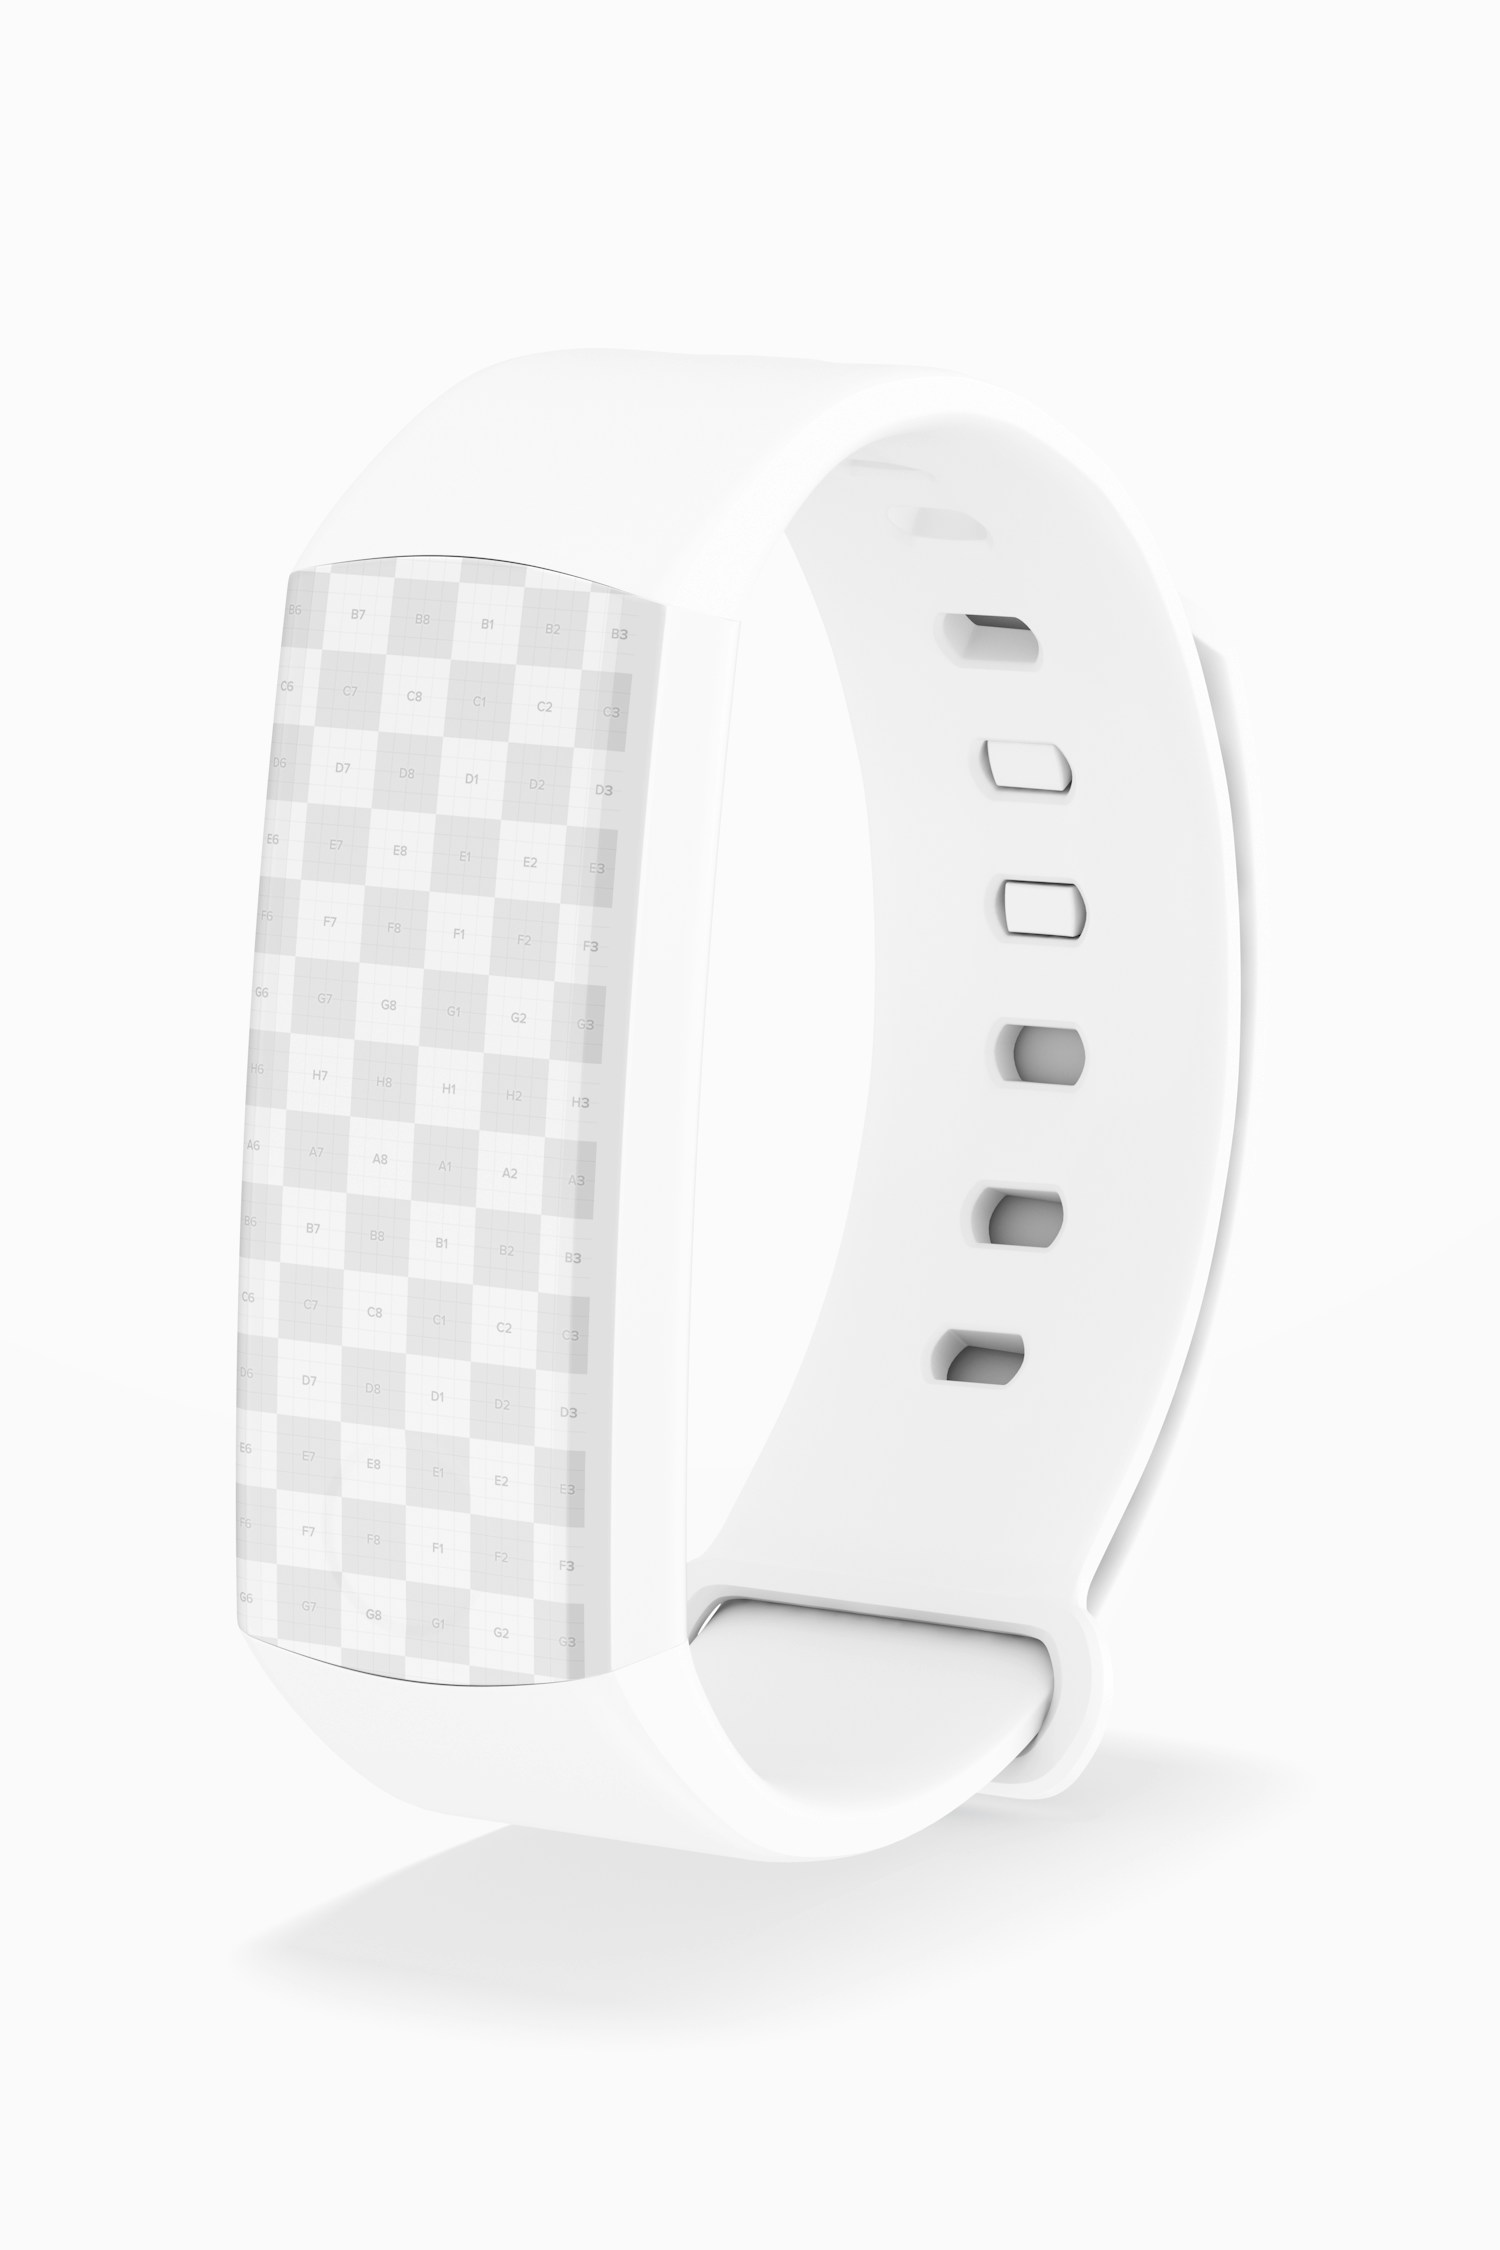 Huawei Fit Honor Band 3 Smart Watch Mockup, Perspective View